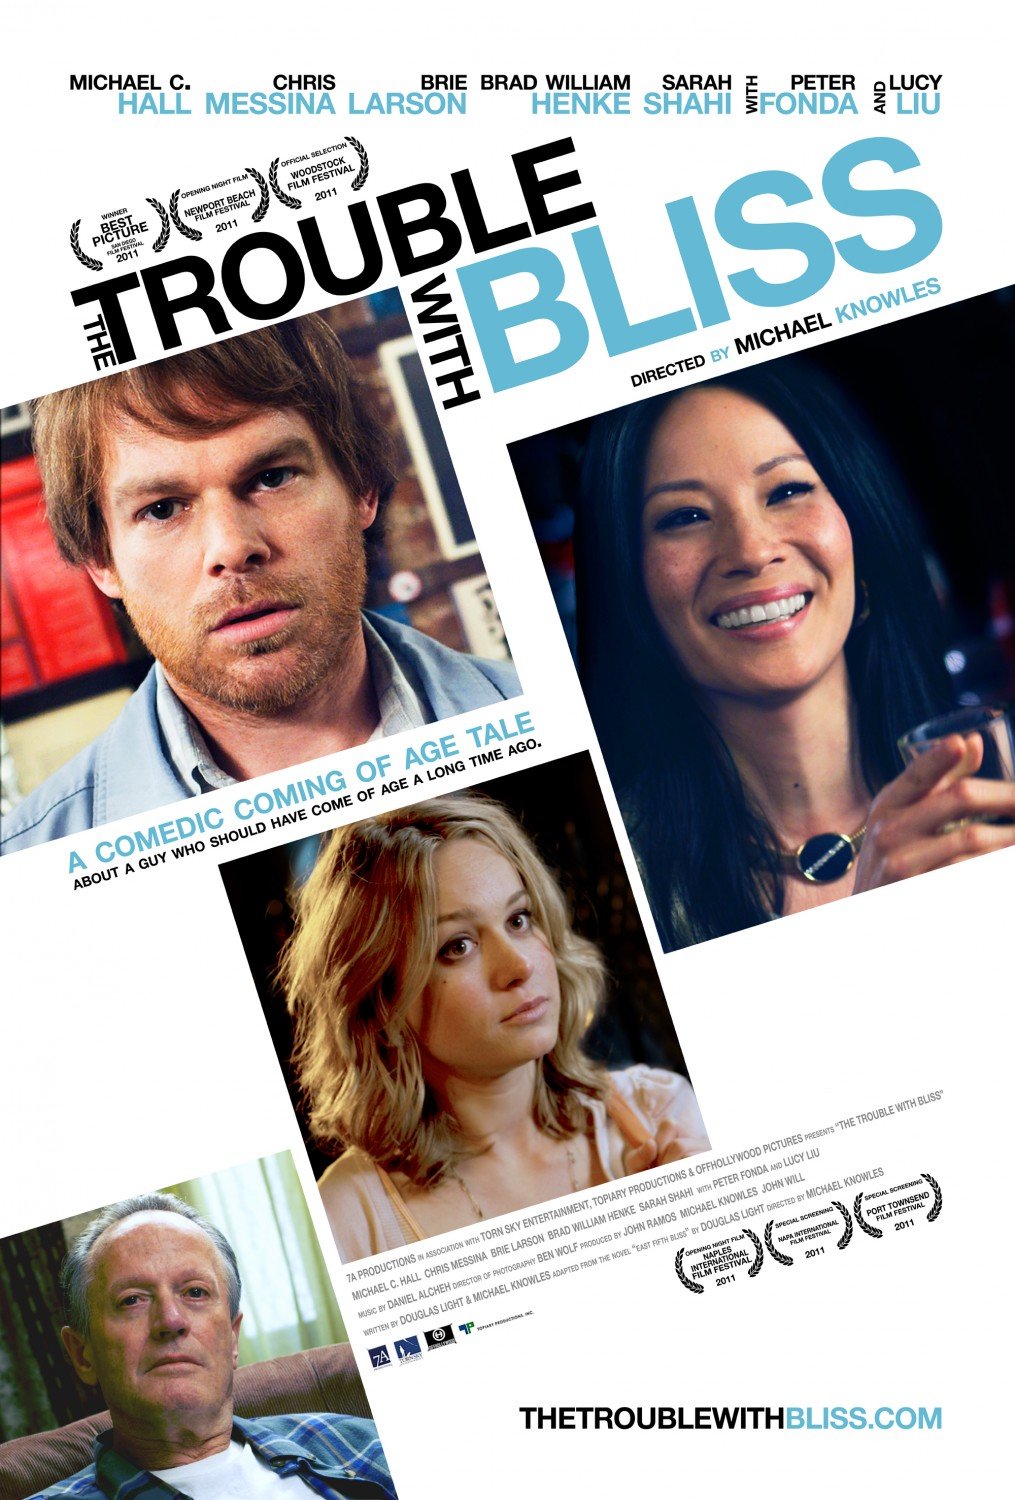 L'affiche du film The Trouble with Bliss